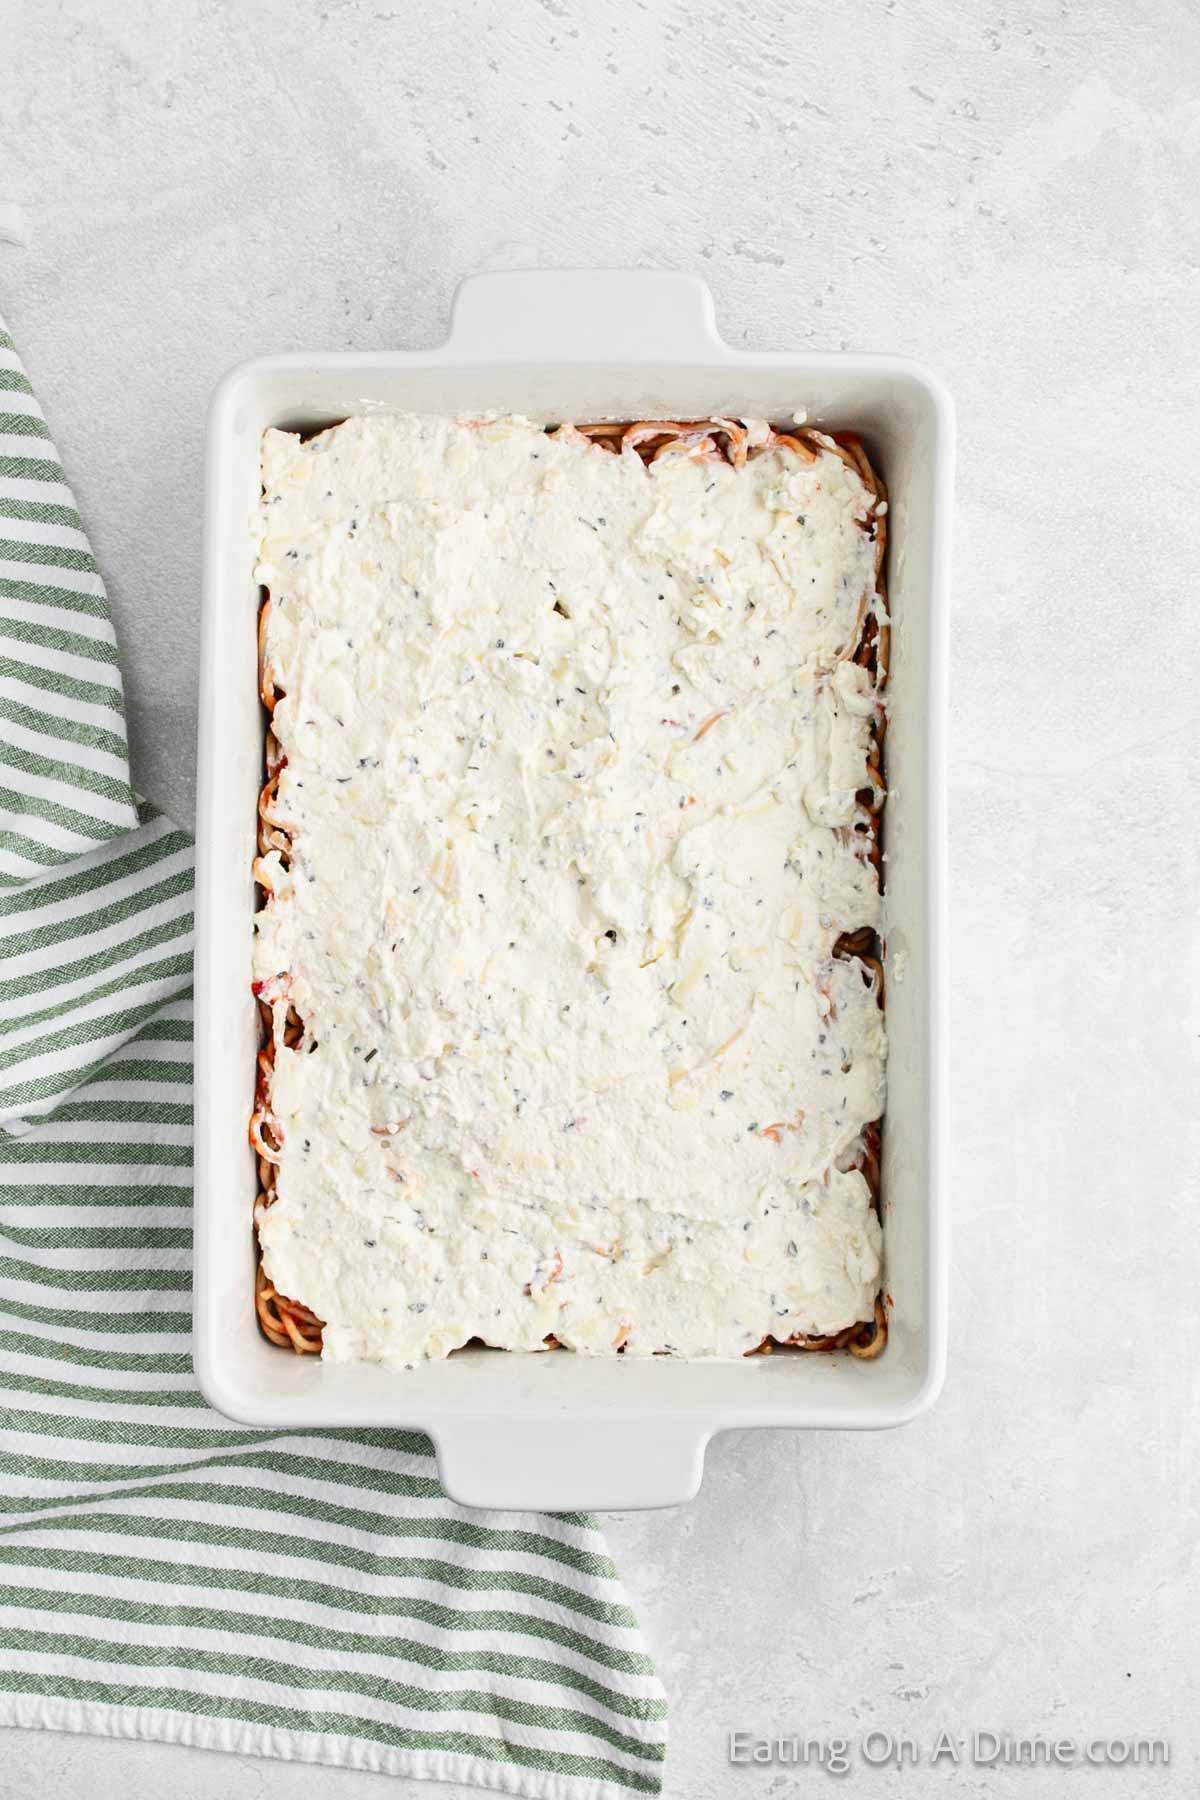 A rectangular white baking dish filled with a creamy, white mixture on top of layered ingredients. This million dollar spaghetti recipe is placed on a light gray surface next to a green and white striped fabric. The edges of the baking dish have handles.